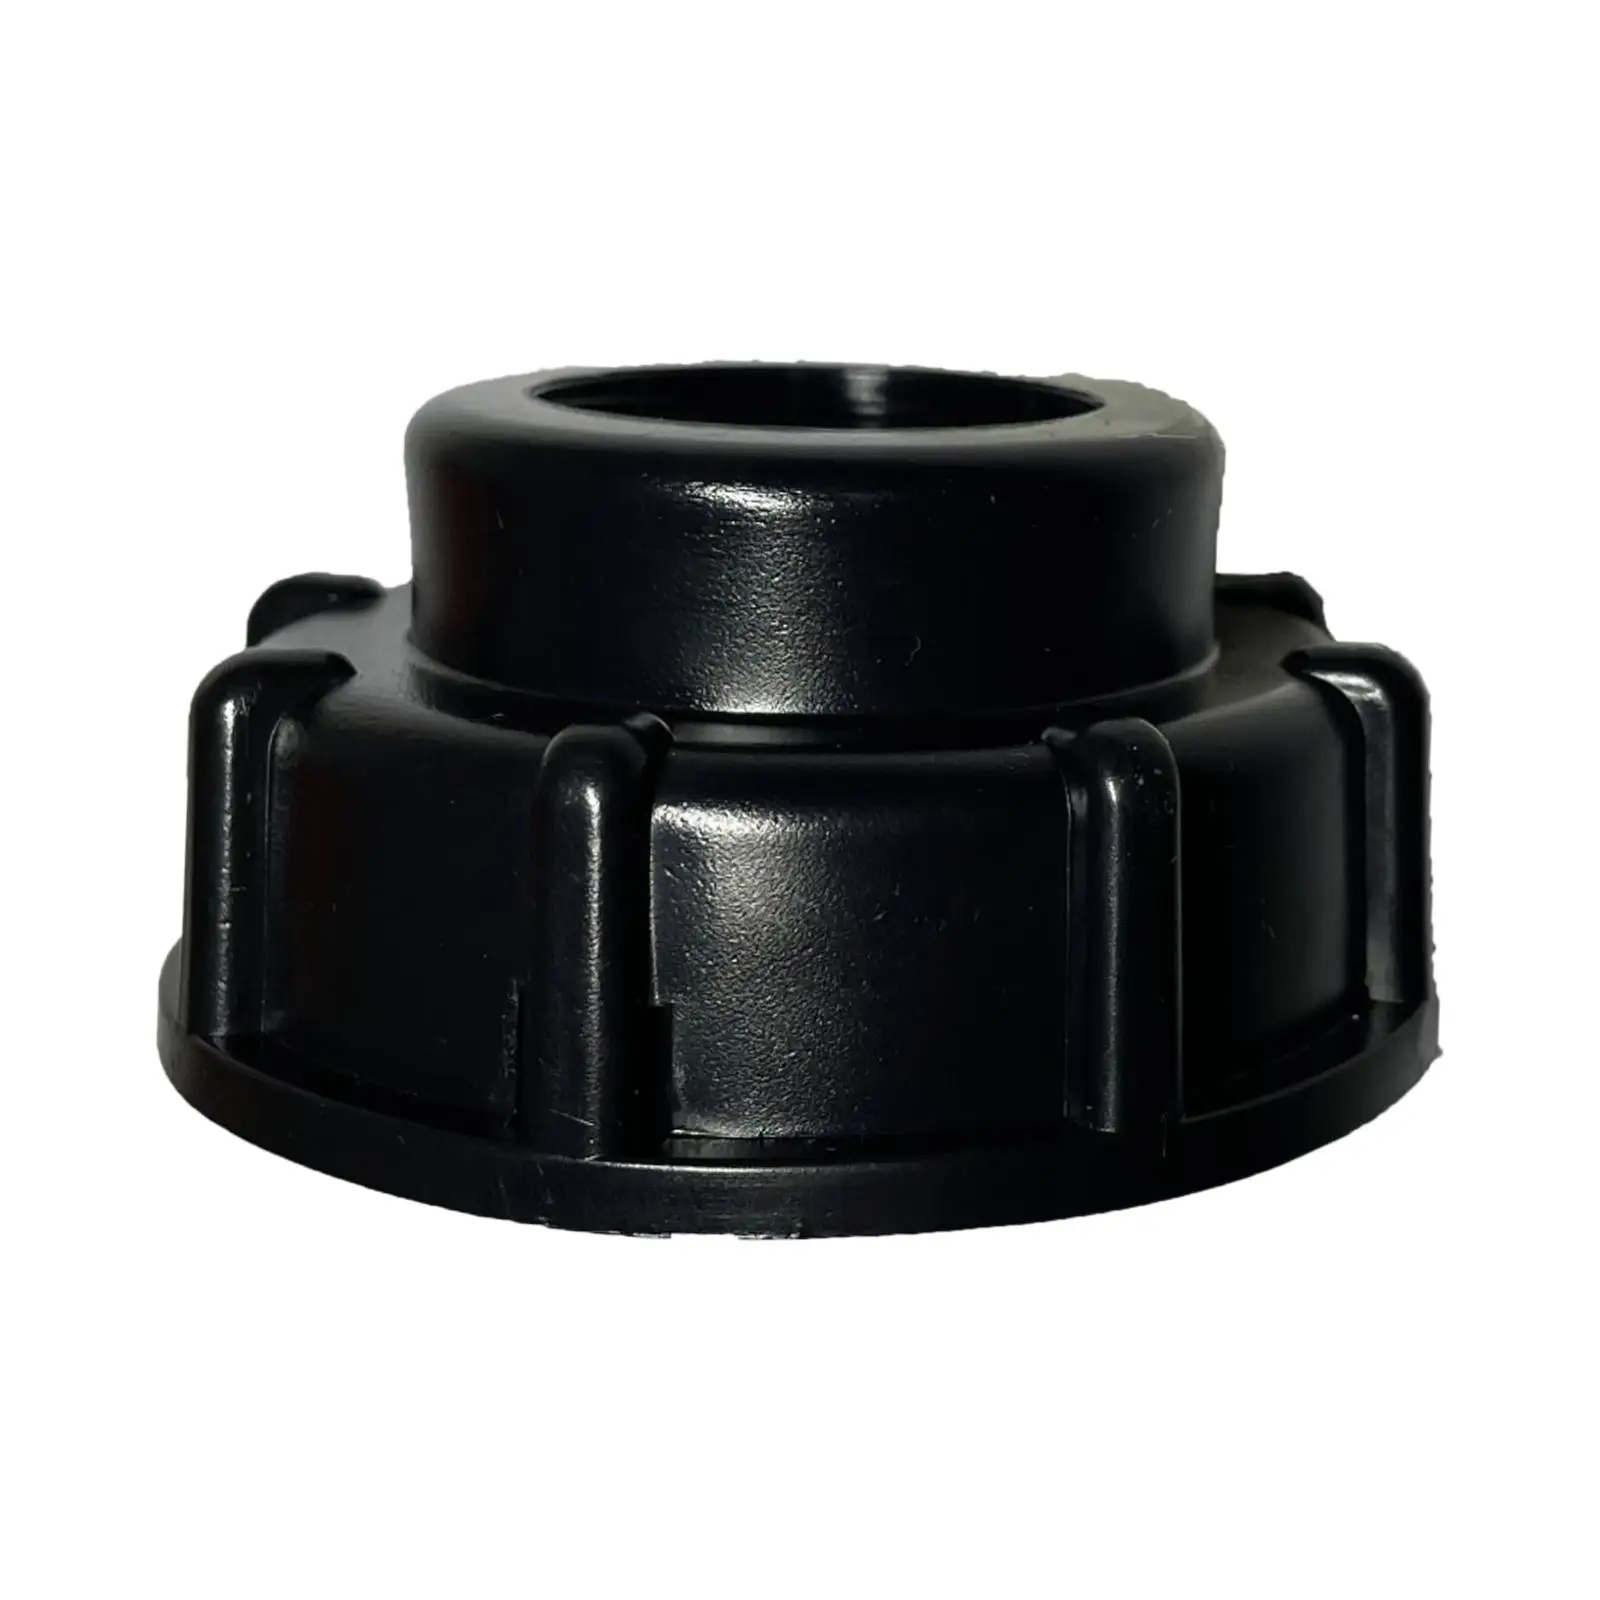 IBC Tank Adapter IBC Tote Tank Drain Adapter for Water Tank Greenhouse Garden Watering Equipment Hose Connector Accessory